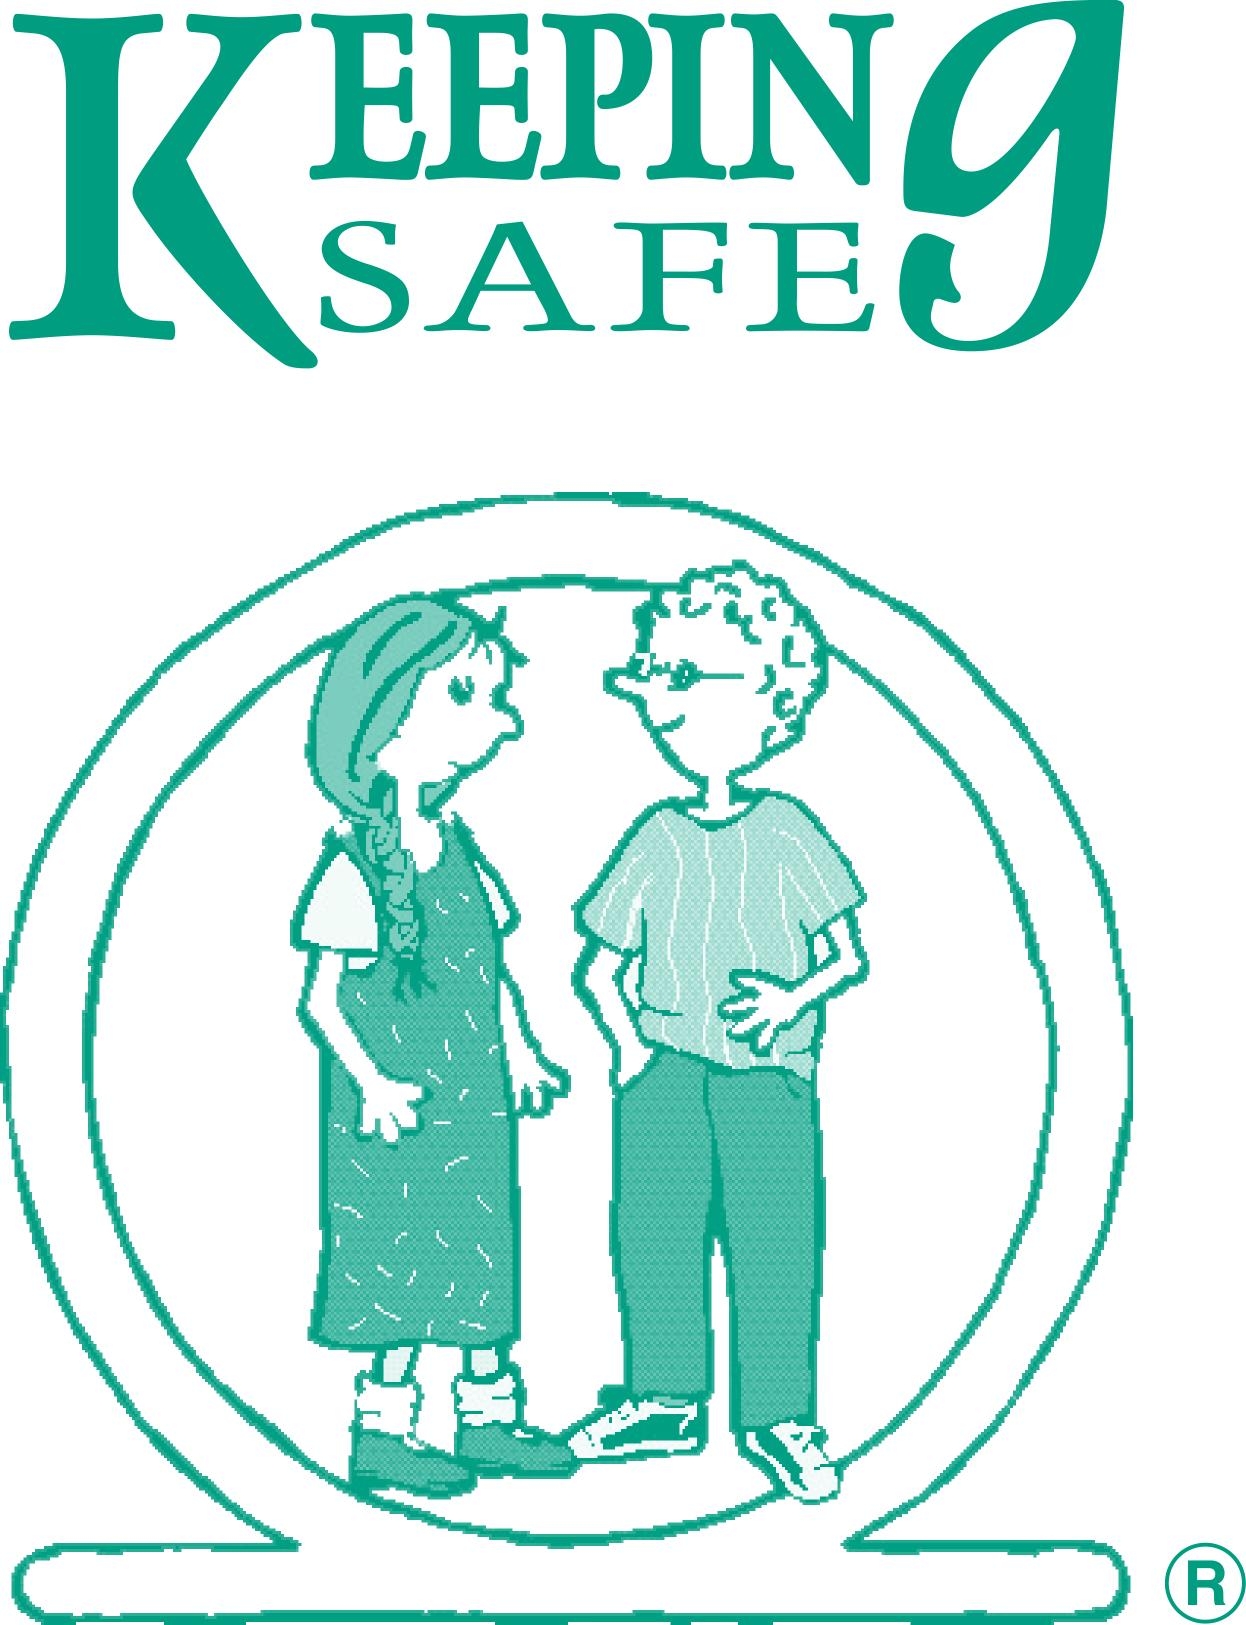 Keeping Children Safe: Training for Staff and Volunteers